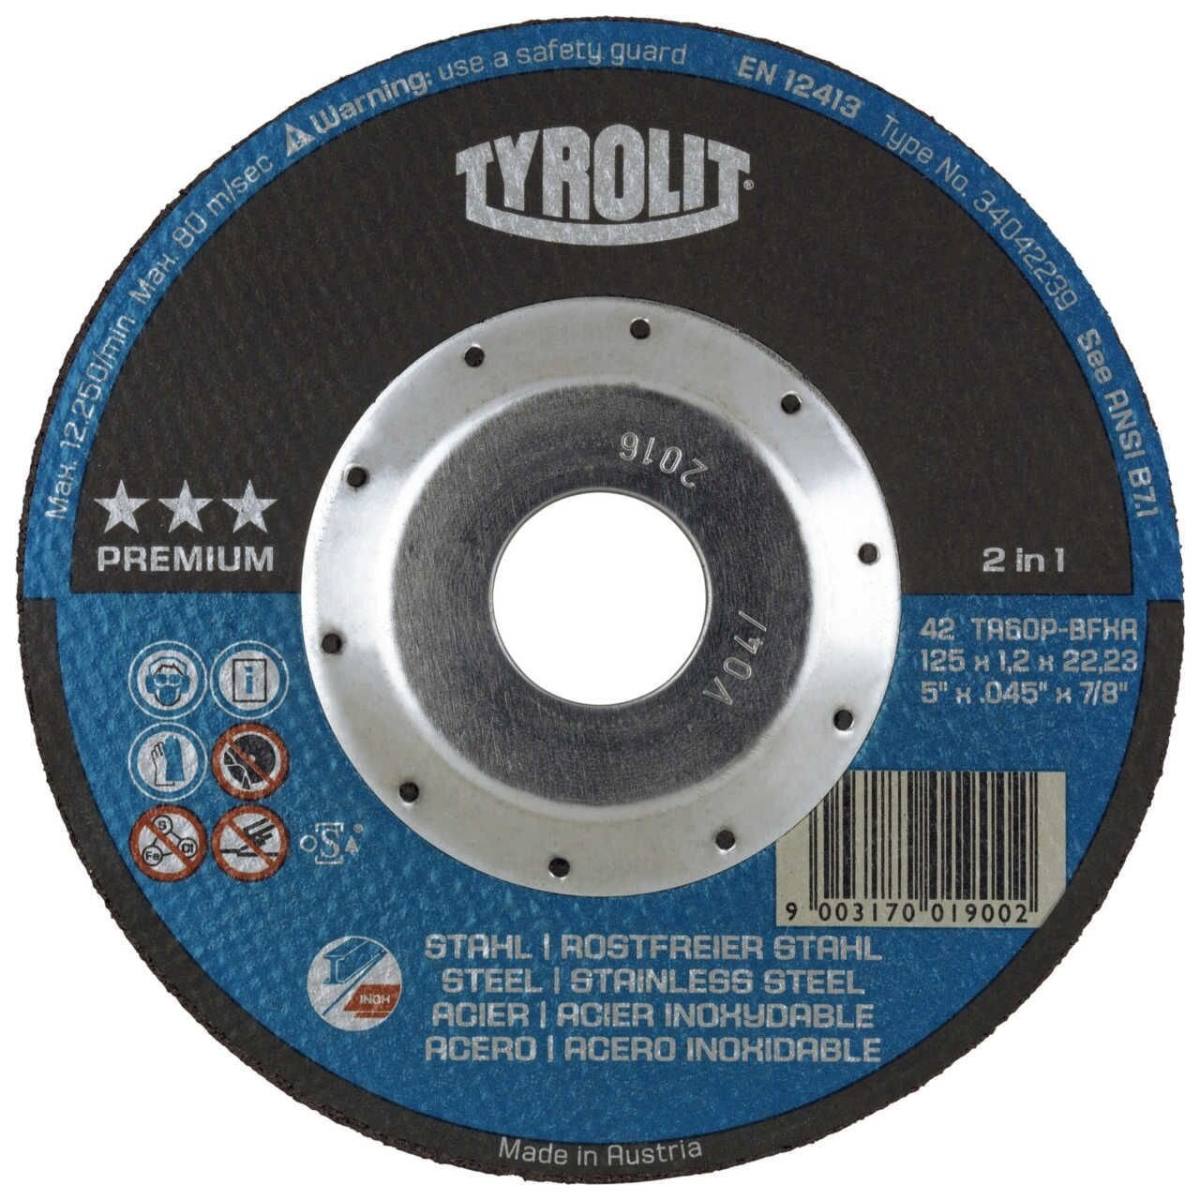 TYROLIT cut-off wheels DxUxH 115x1.2x22.23 With DEEP Cut Protection for steel and stainless steel, shape: 42 - offset version, Art. 34042238